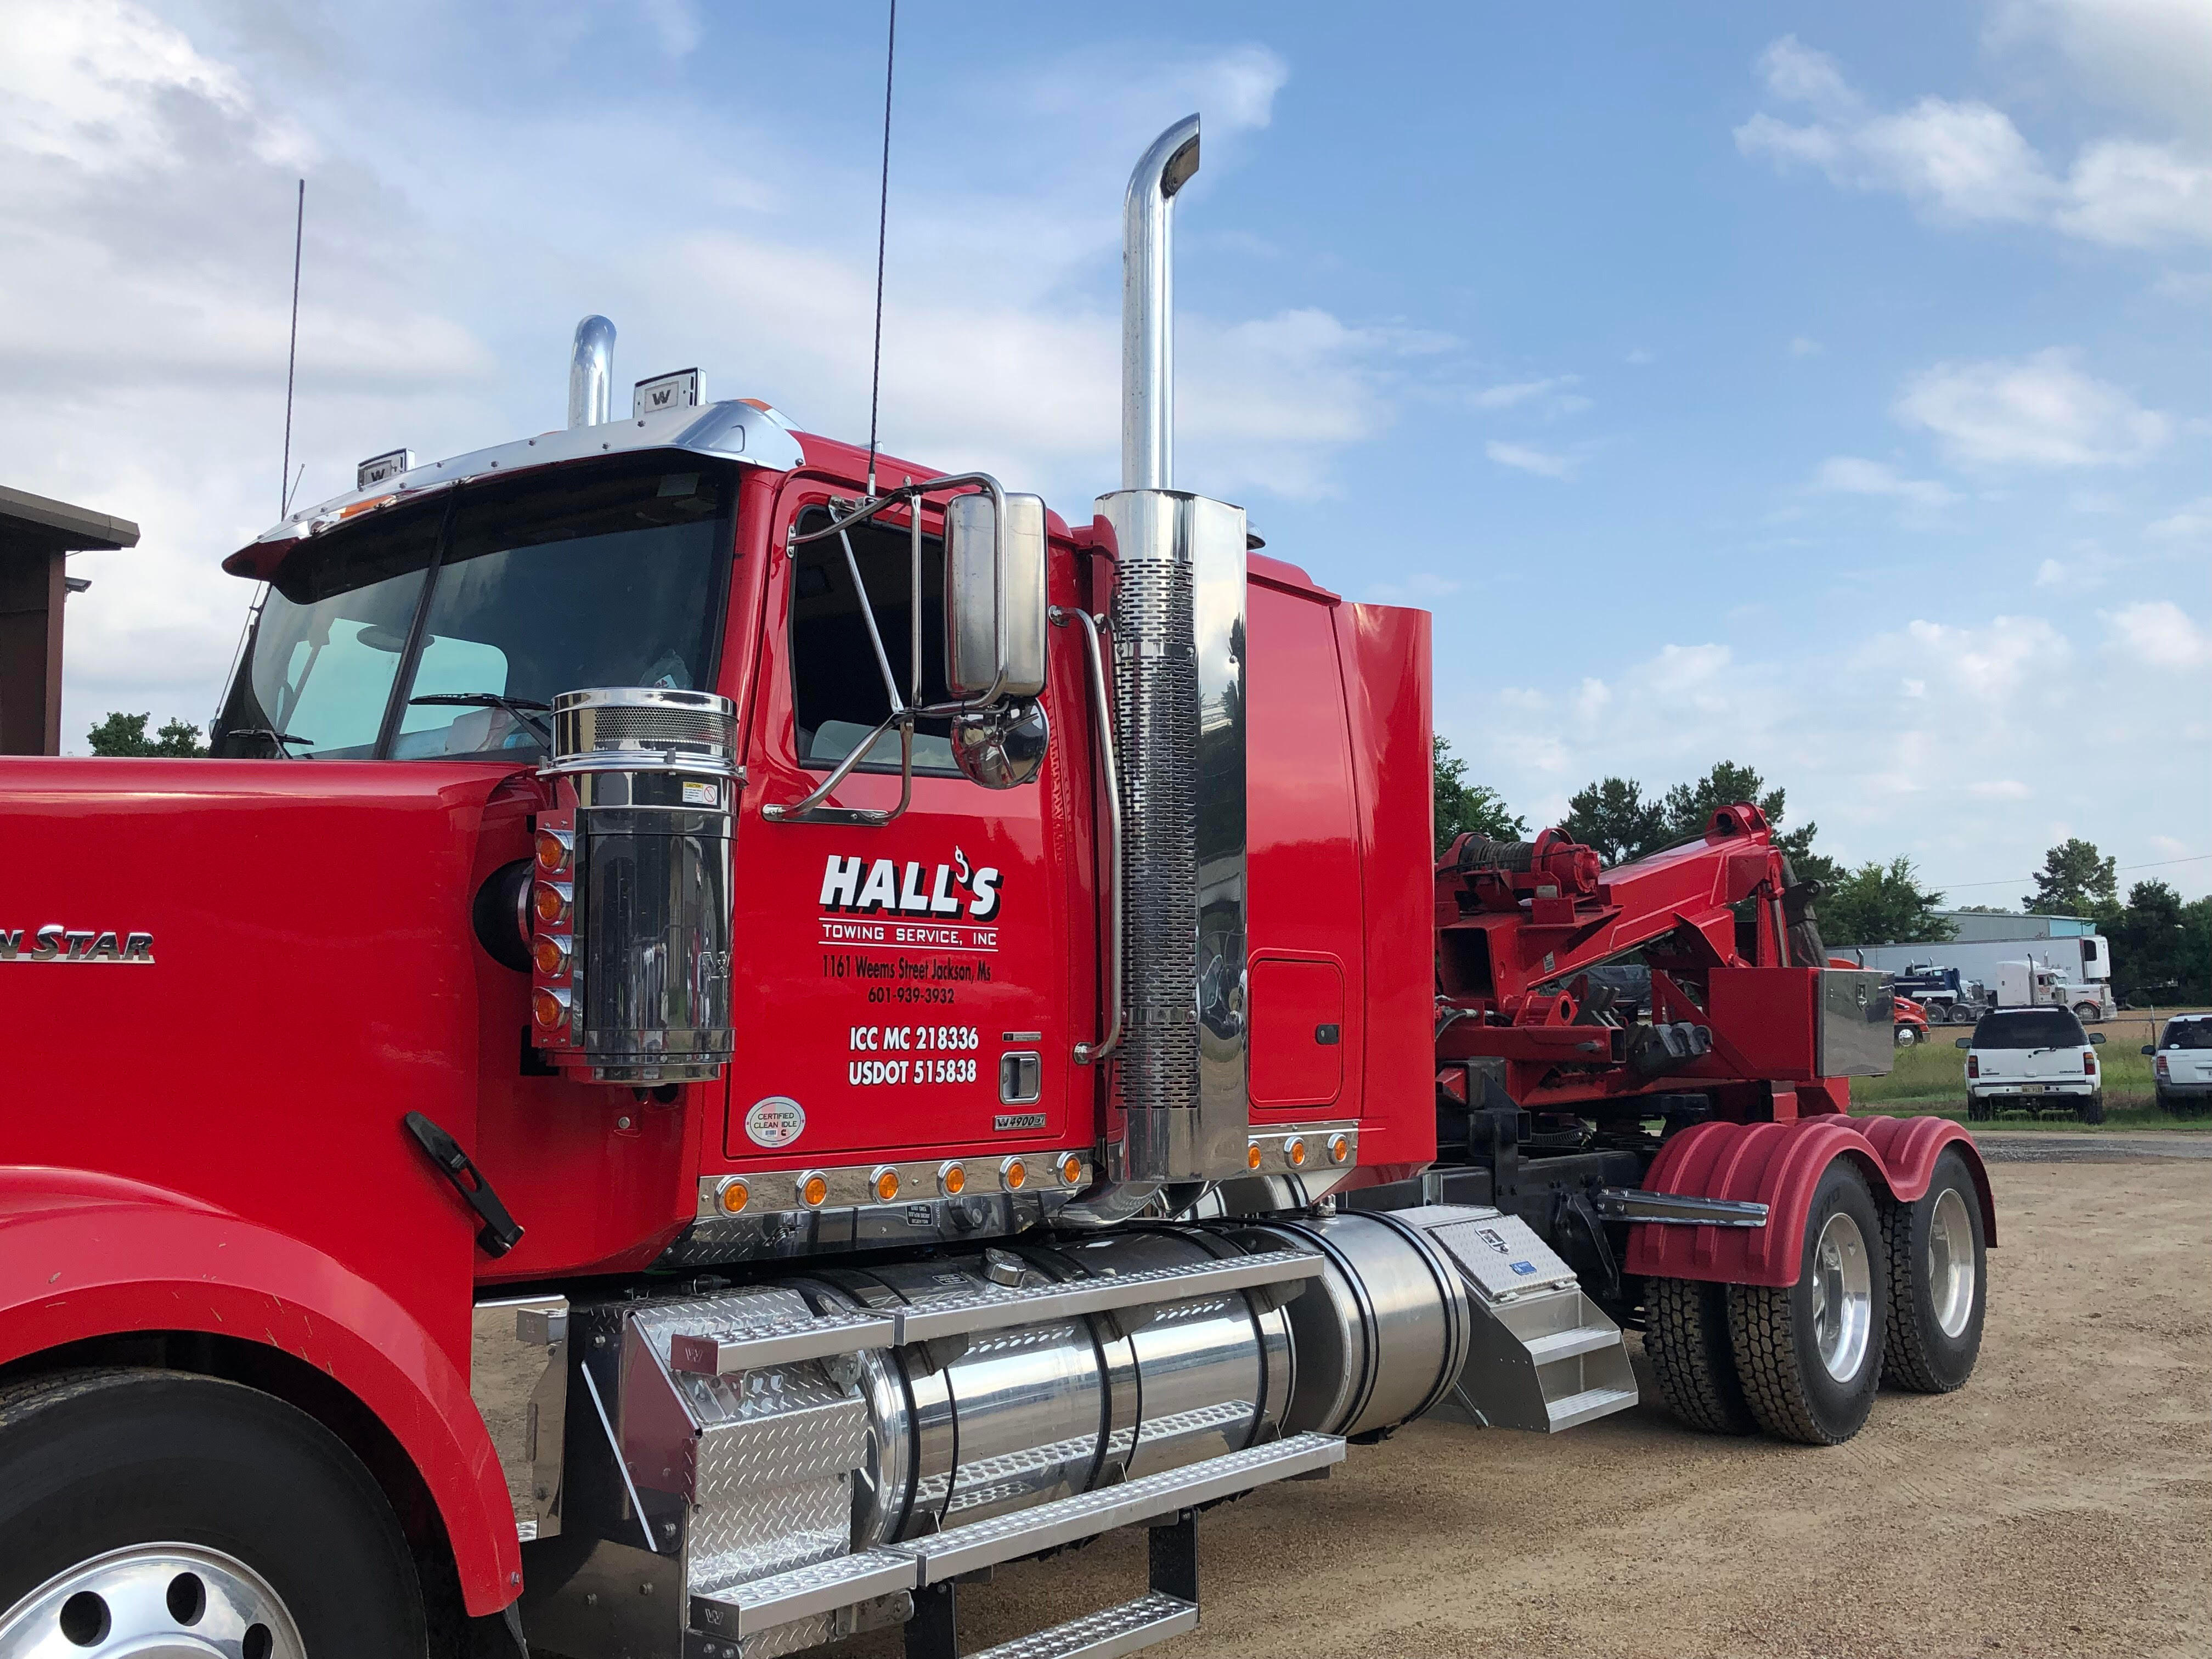 Hall’s Towing Service is a full service 24/7 towing company in Jackson, MS committed to providing the most comprehensive services for all your towing and recovery needs. Its starts with an experienced and friendly staff of customer representative.